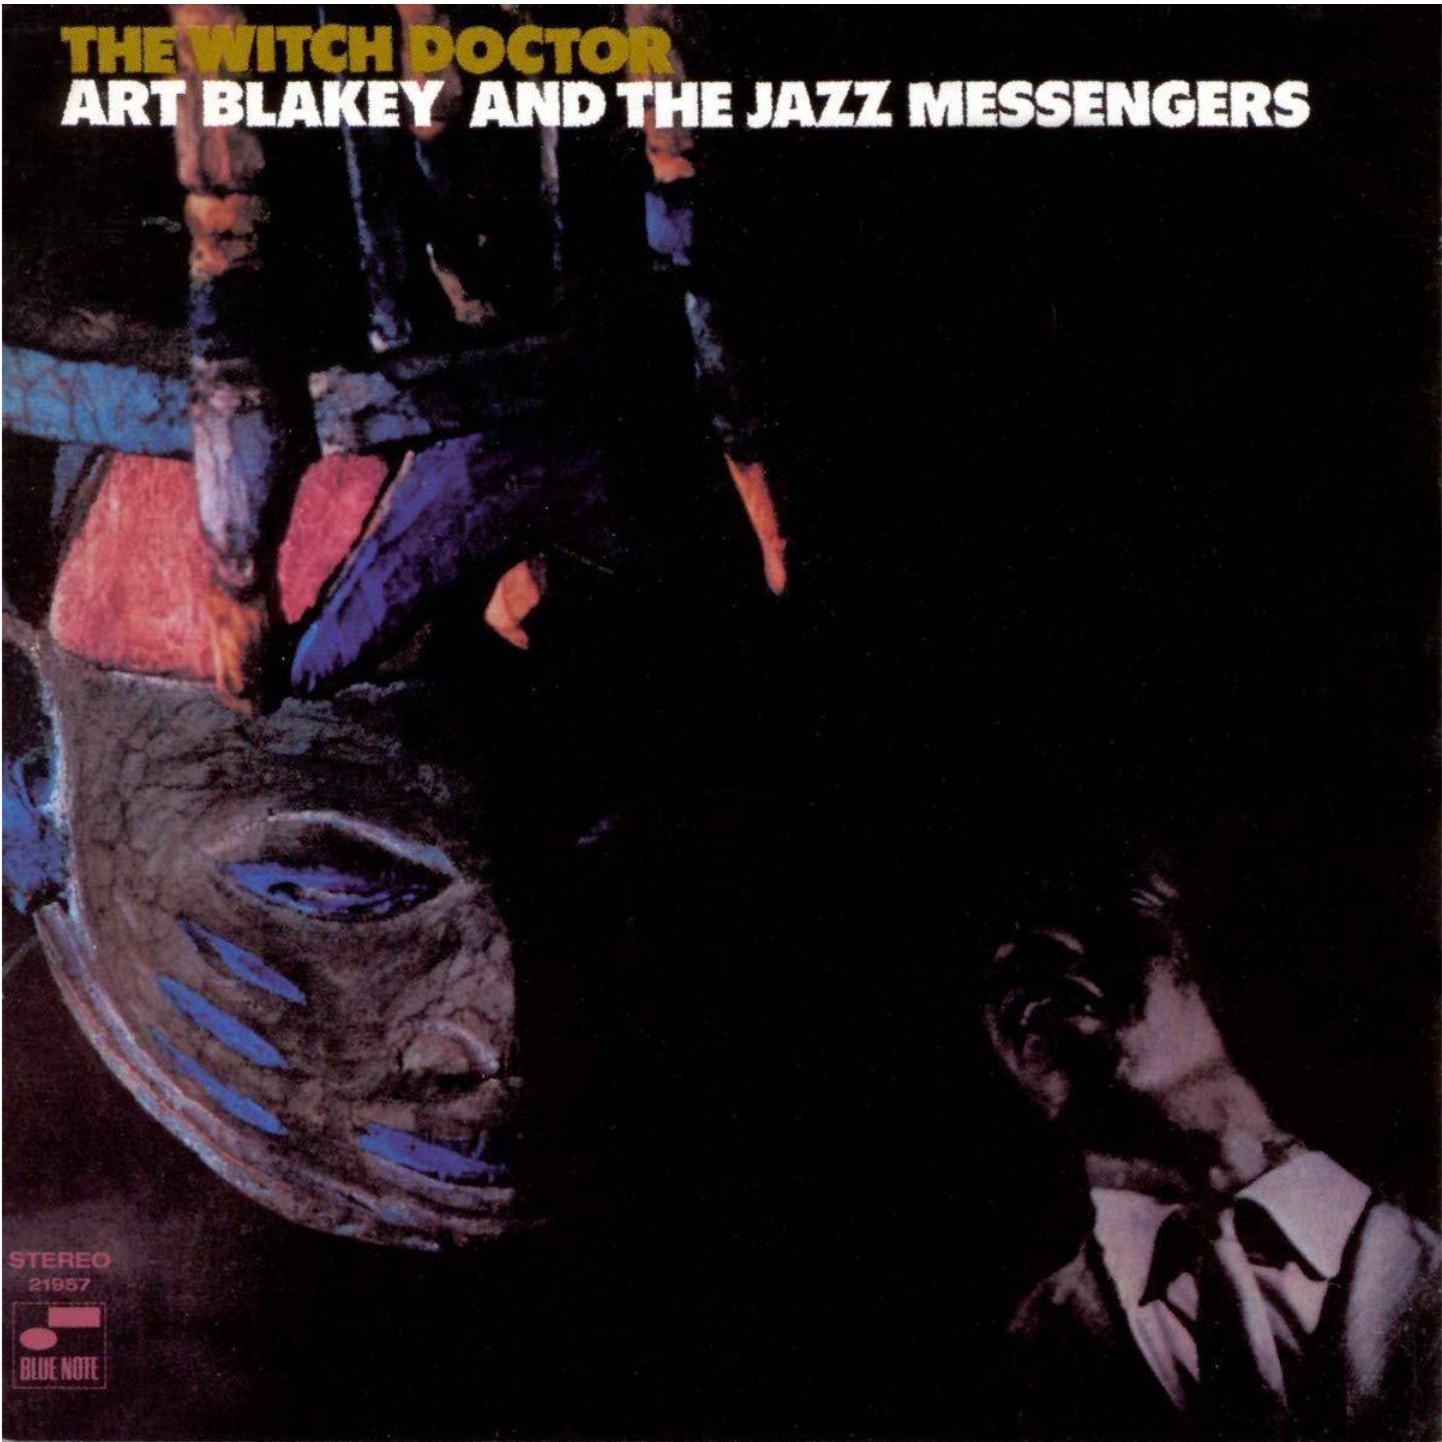 Art Blakey & The Jazz Messengers - The Witch Doctor - Tone Poet LP